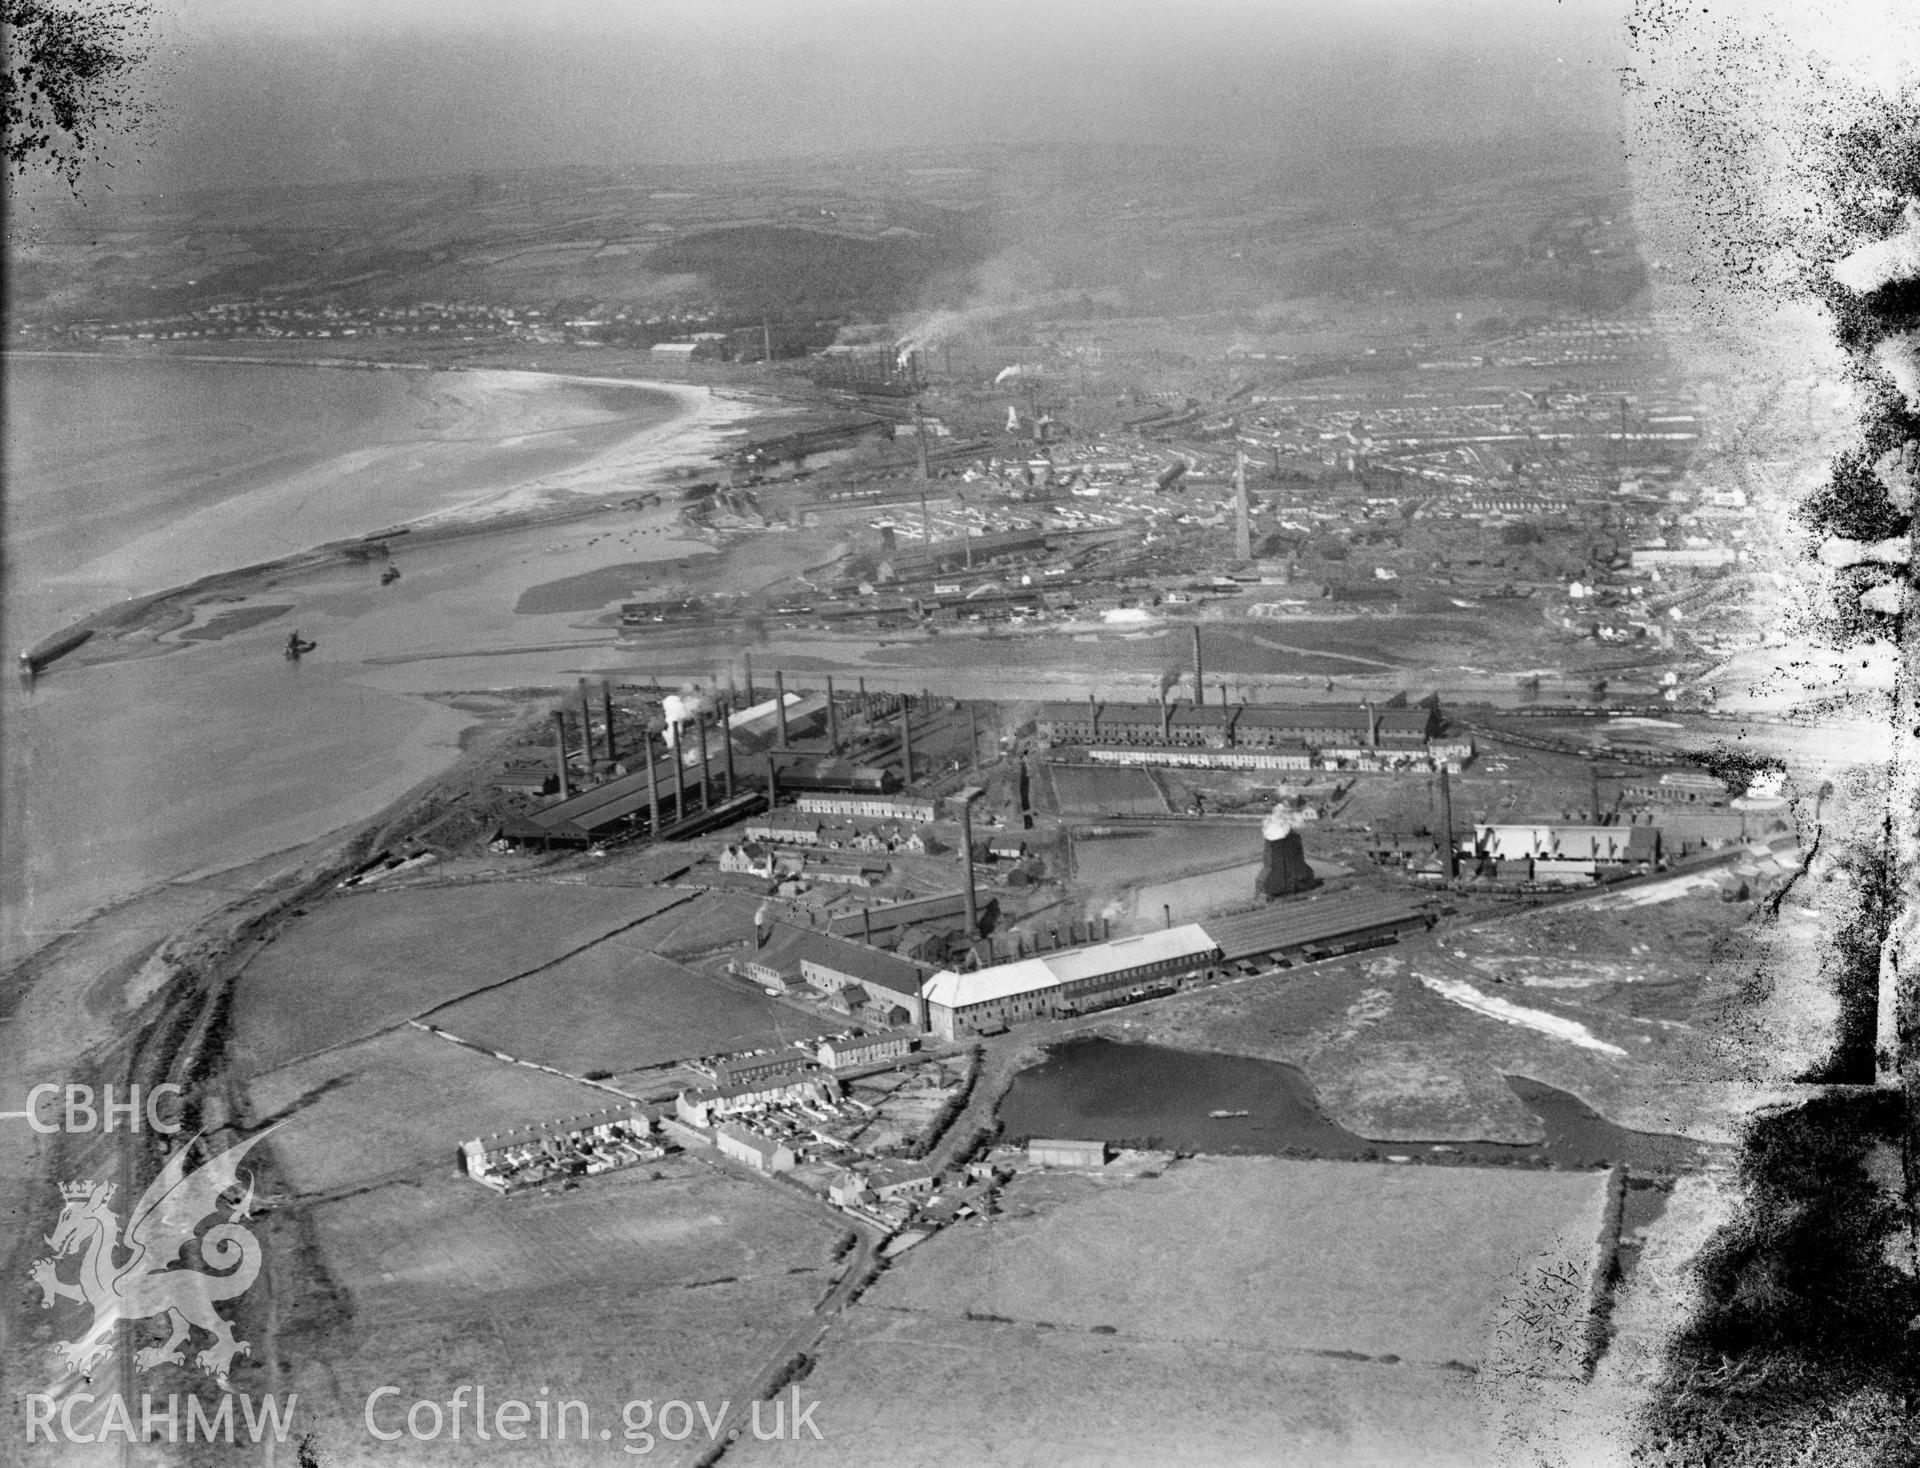 General view of Llanelli showing steelworks, oblique aerial view. 5?x4? black and white glass plate negative.